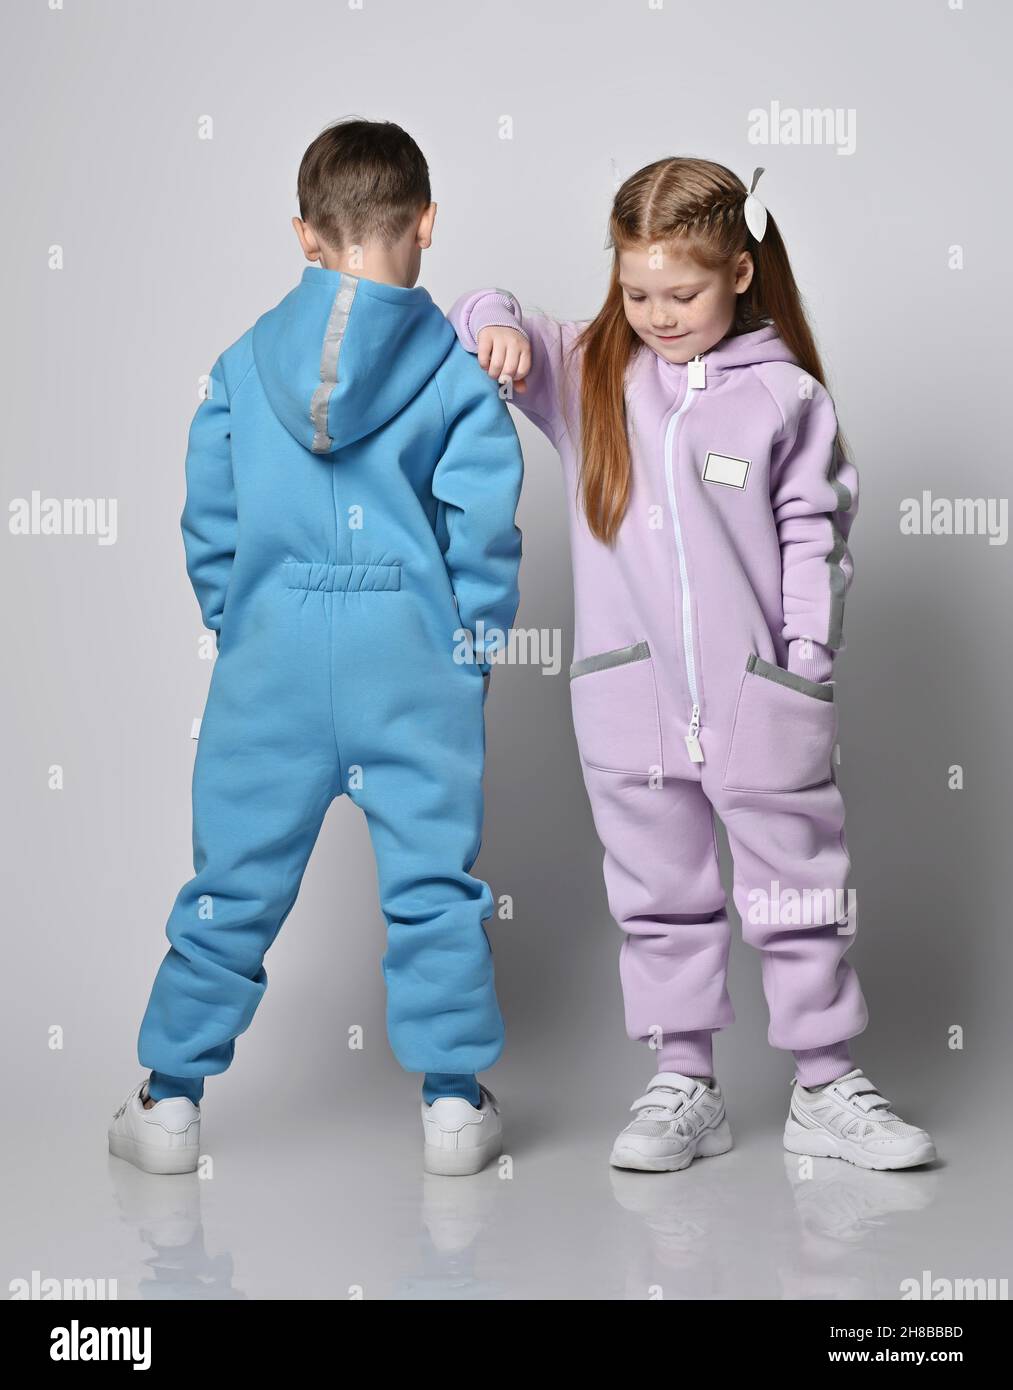 Two kids in jumpsuits are standing next to each other, boy with his back to us and girl with her face and looks down Stock Photo